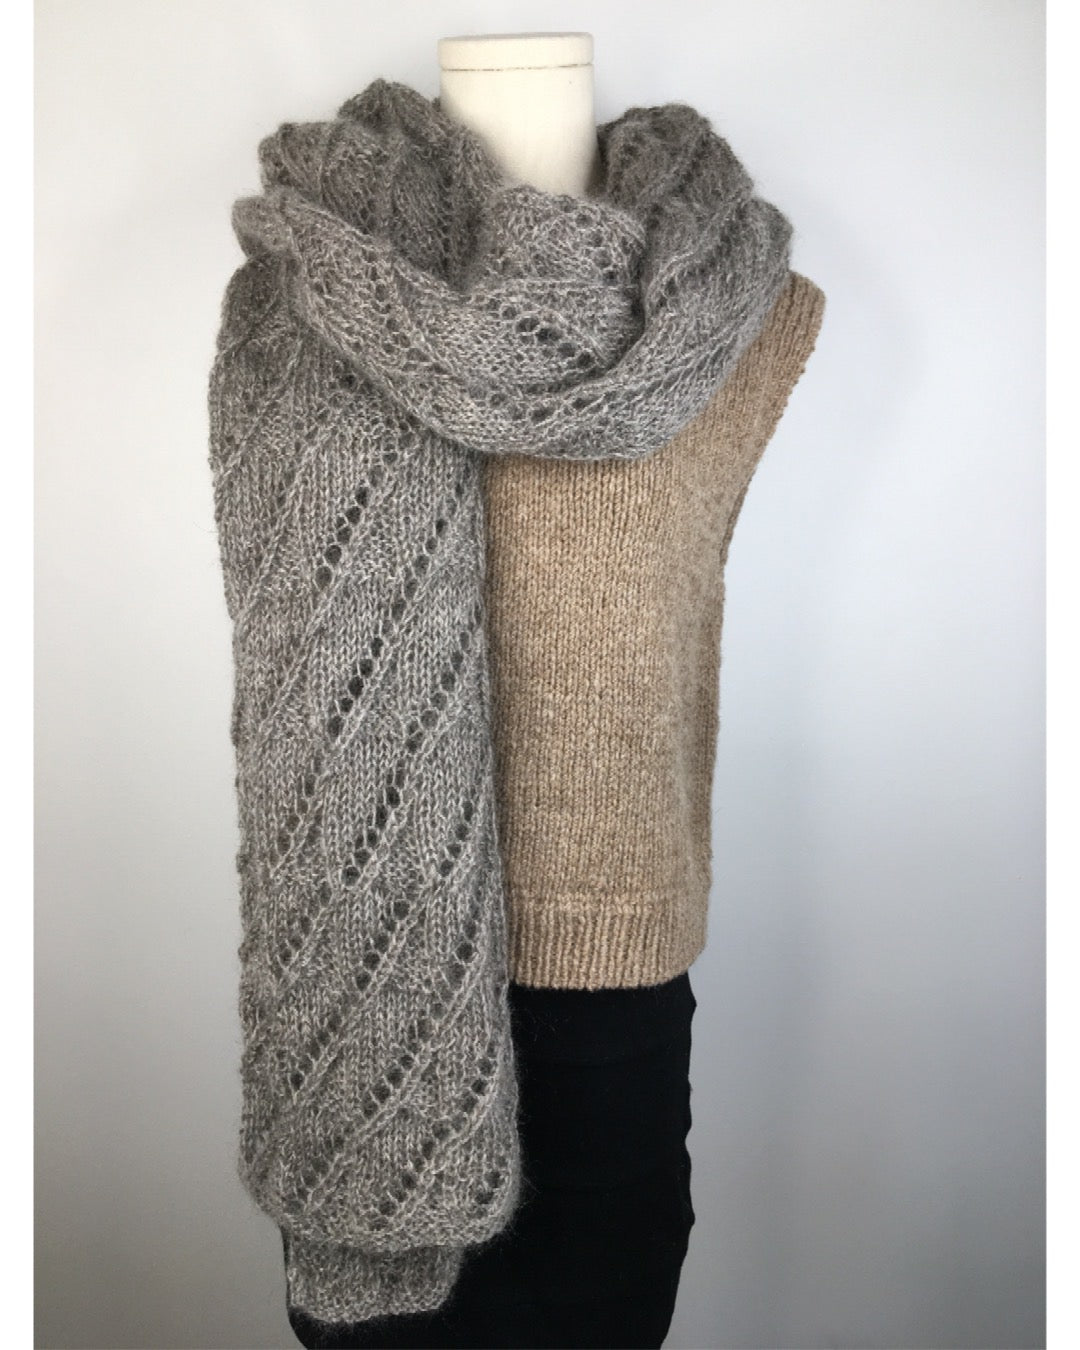 A lace scarf knit in Mohair DK draped over a mannequin